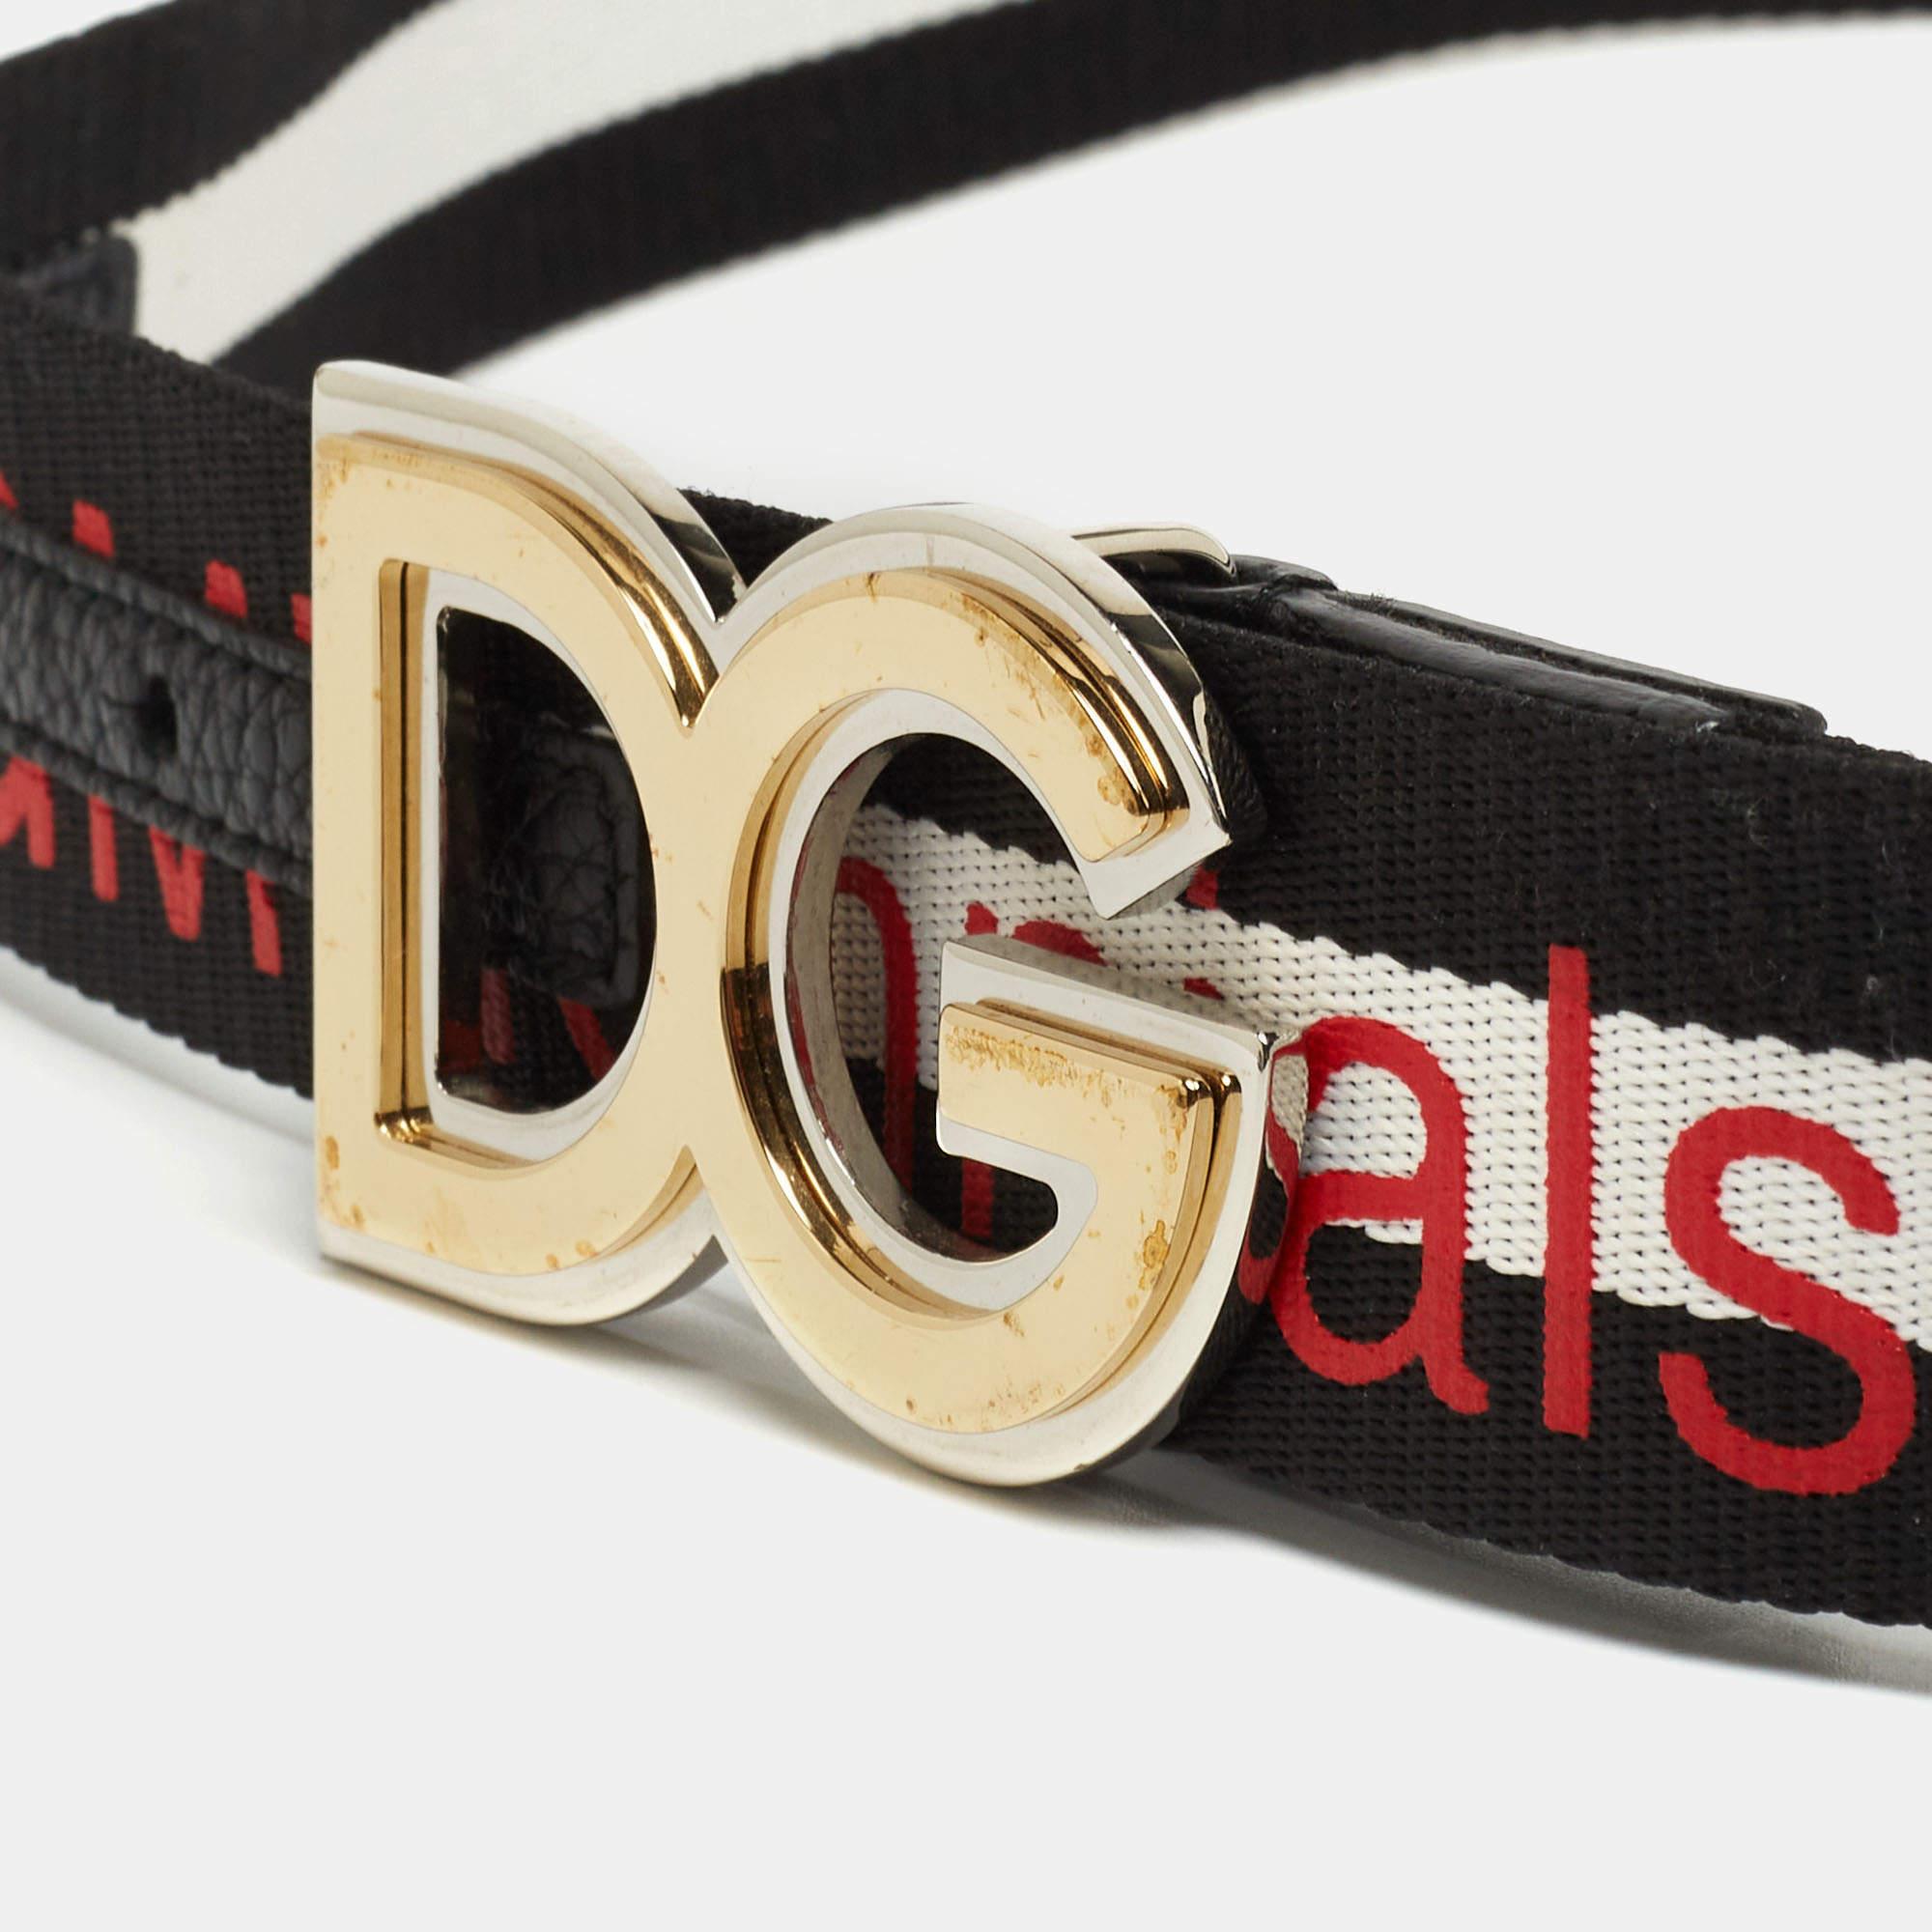 This Dolce & Gabbana belt is absolutely fabulous with its signature DG buckle. The canvas belt shines with its gold-tone hardware in the form of the signature symbols of the brand. It is classic, stylish and perfect for you.

